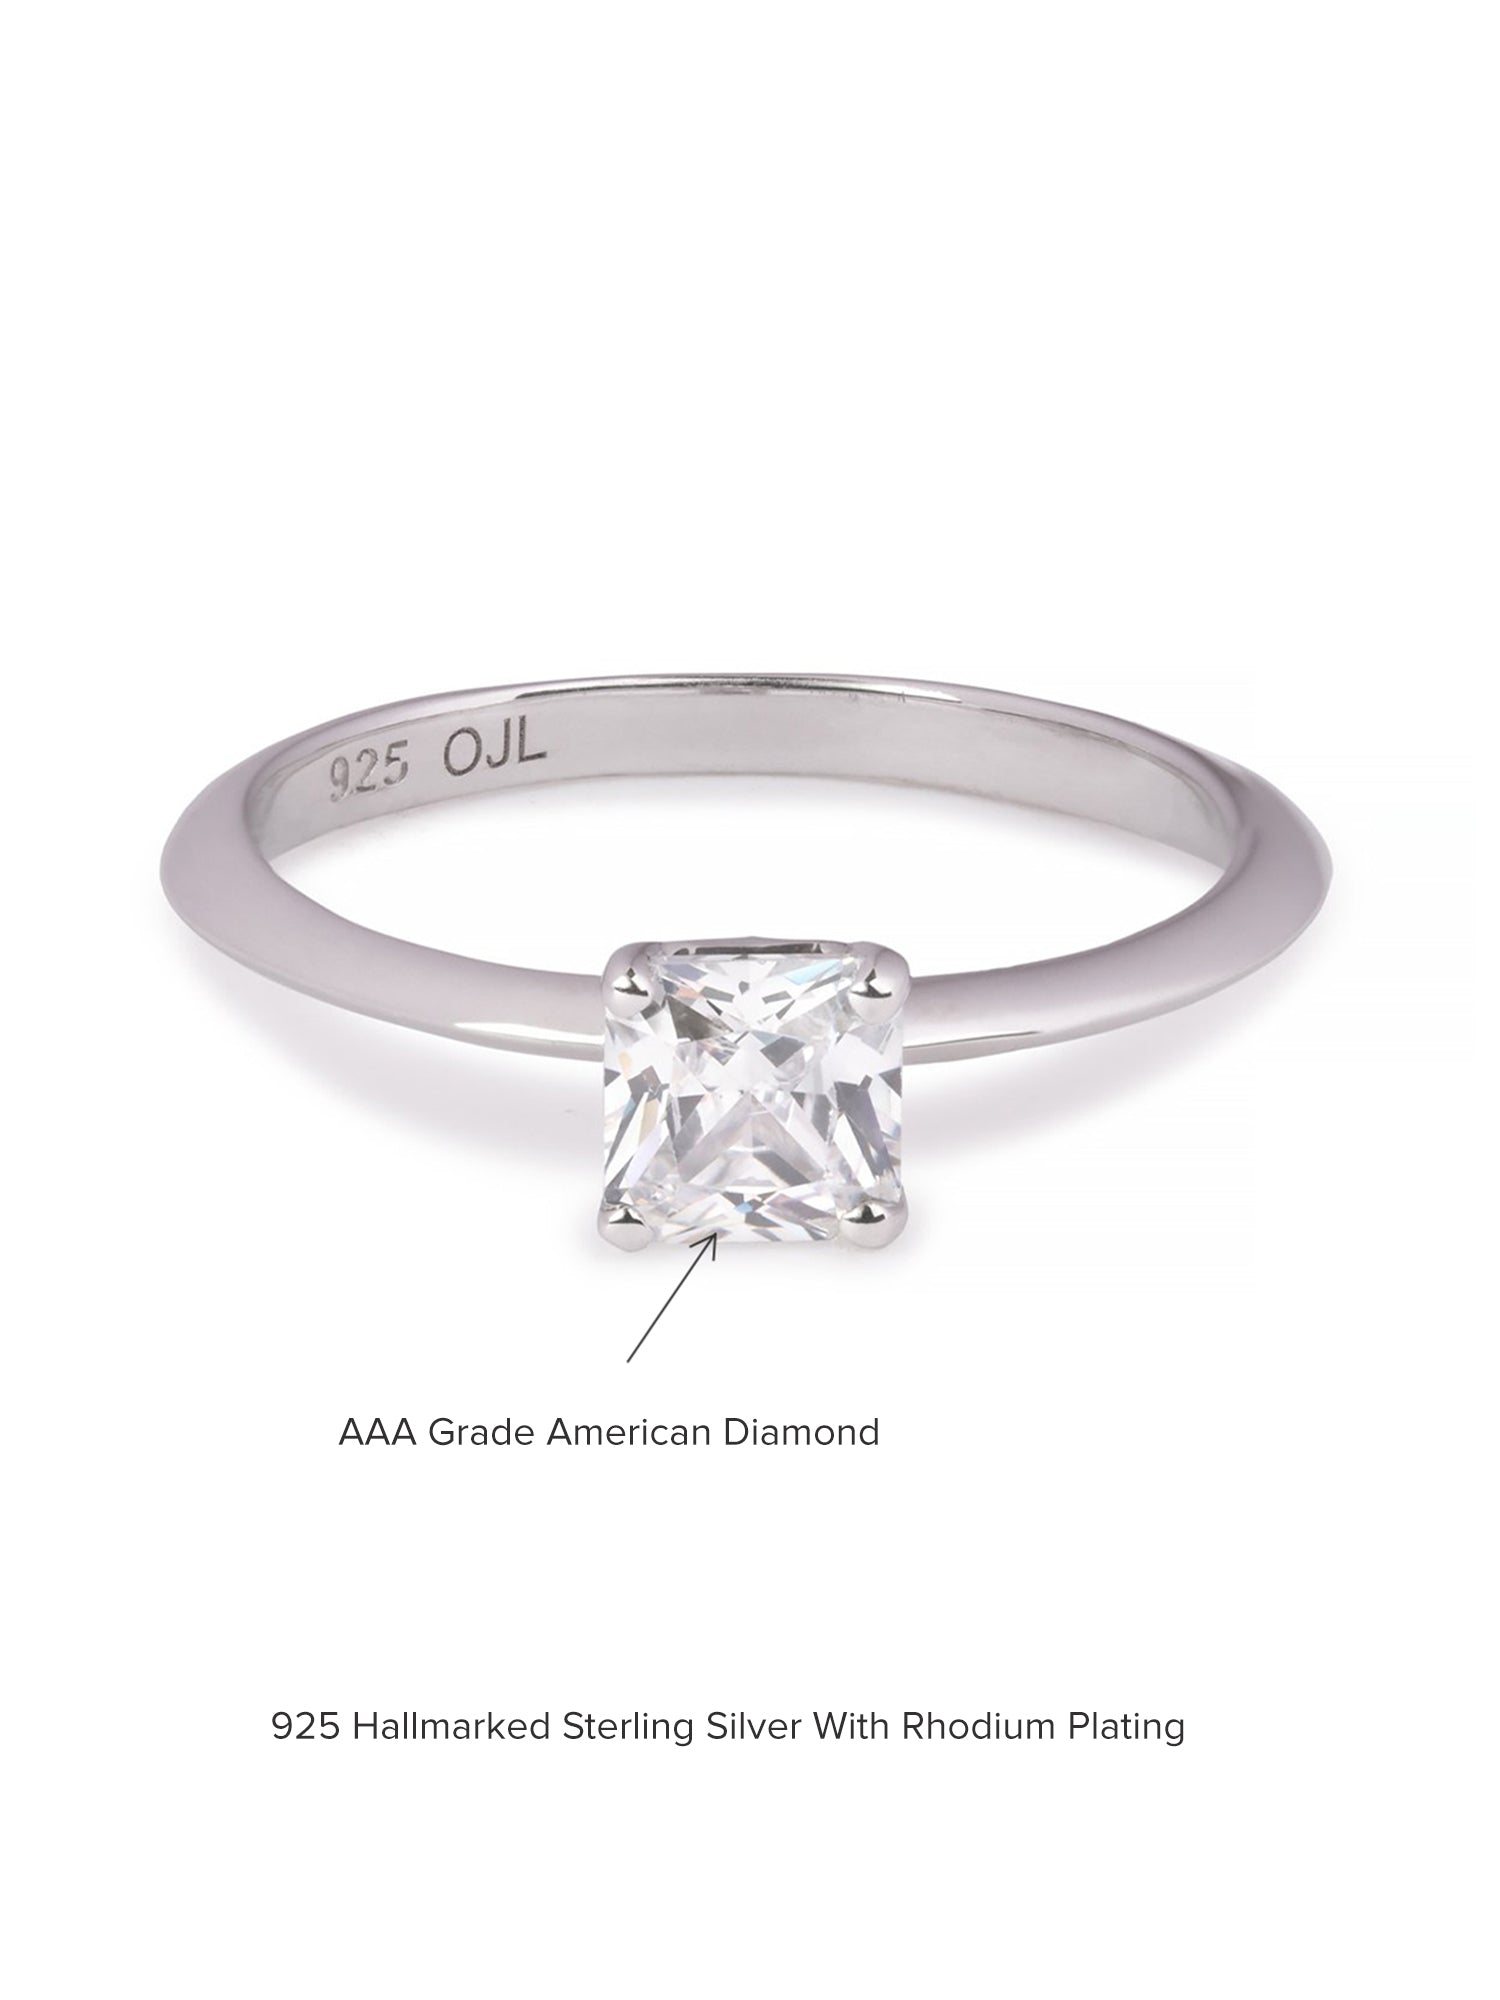 ORNATE JEWELS 1 CARAT SOLITAIRE RING FOR WOMEN-5